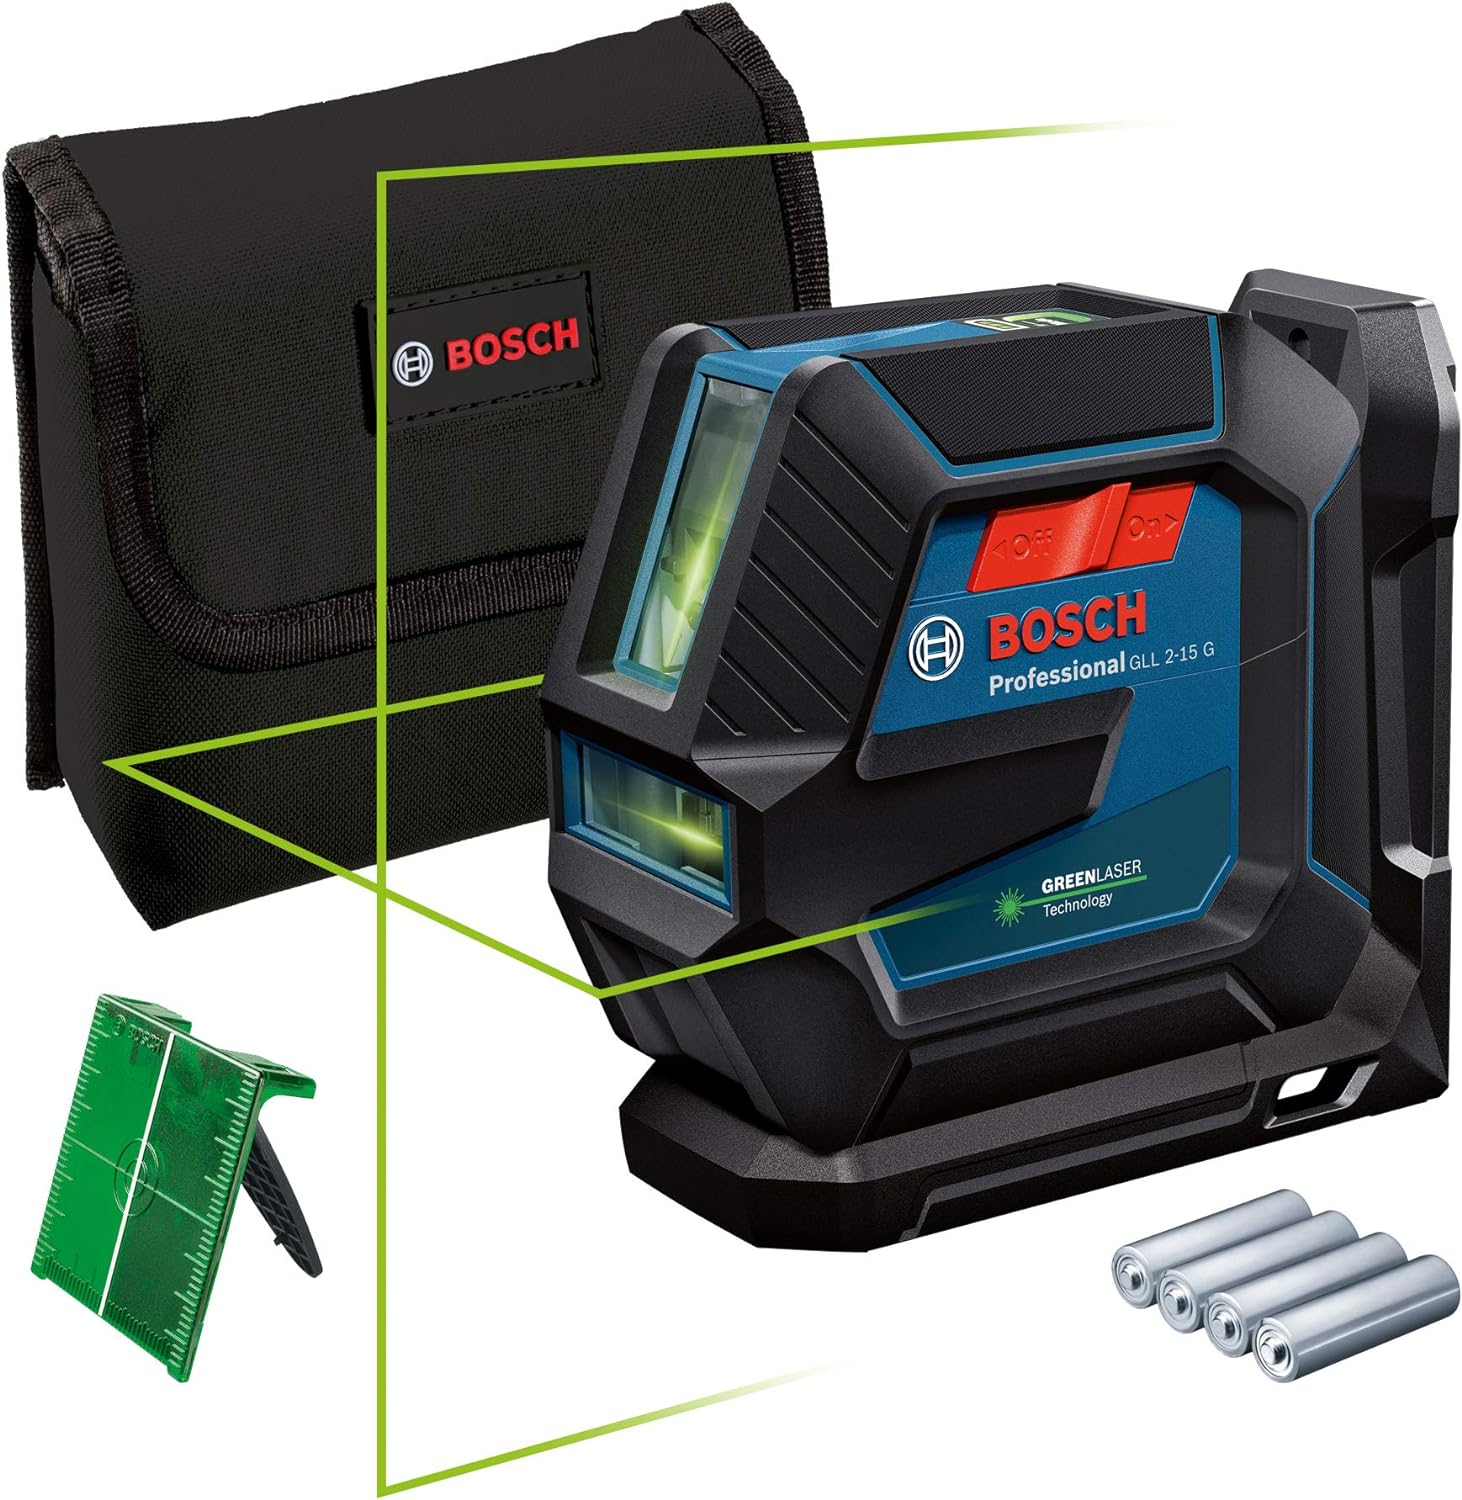 Bosch Professional Laser Level GLL 2-15 G Review UK